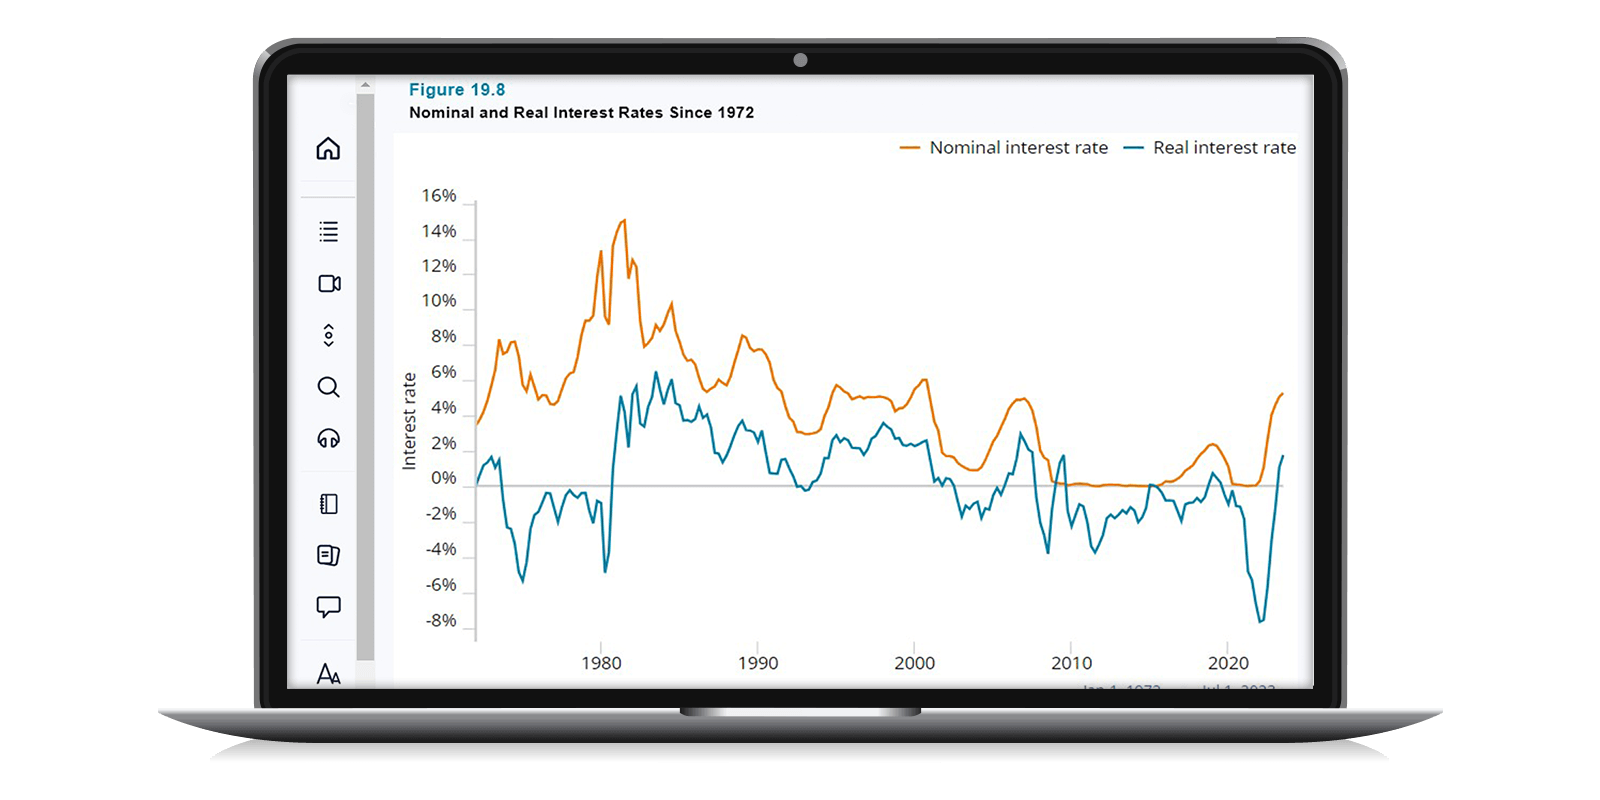 Screenshot of graph showing Nominal and Real Interest Rates Since 1972.